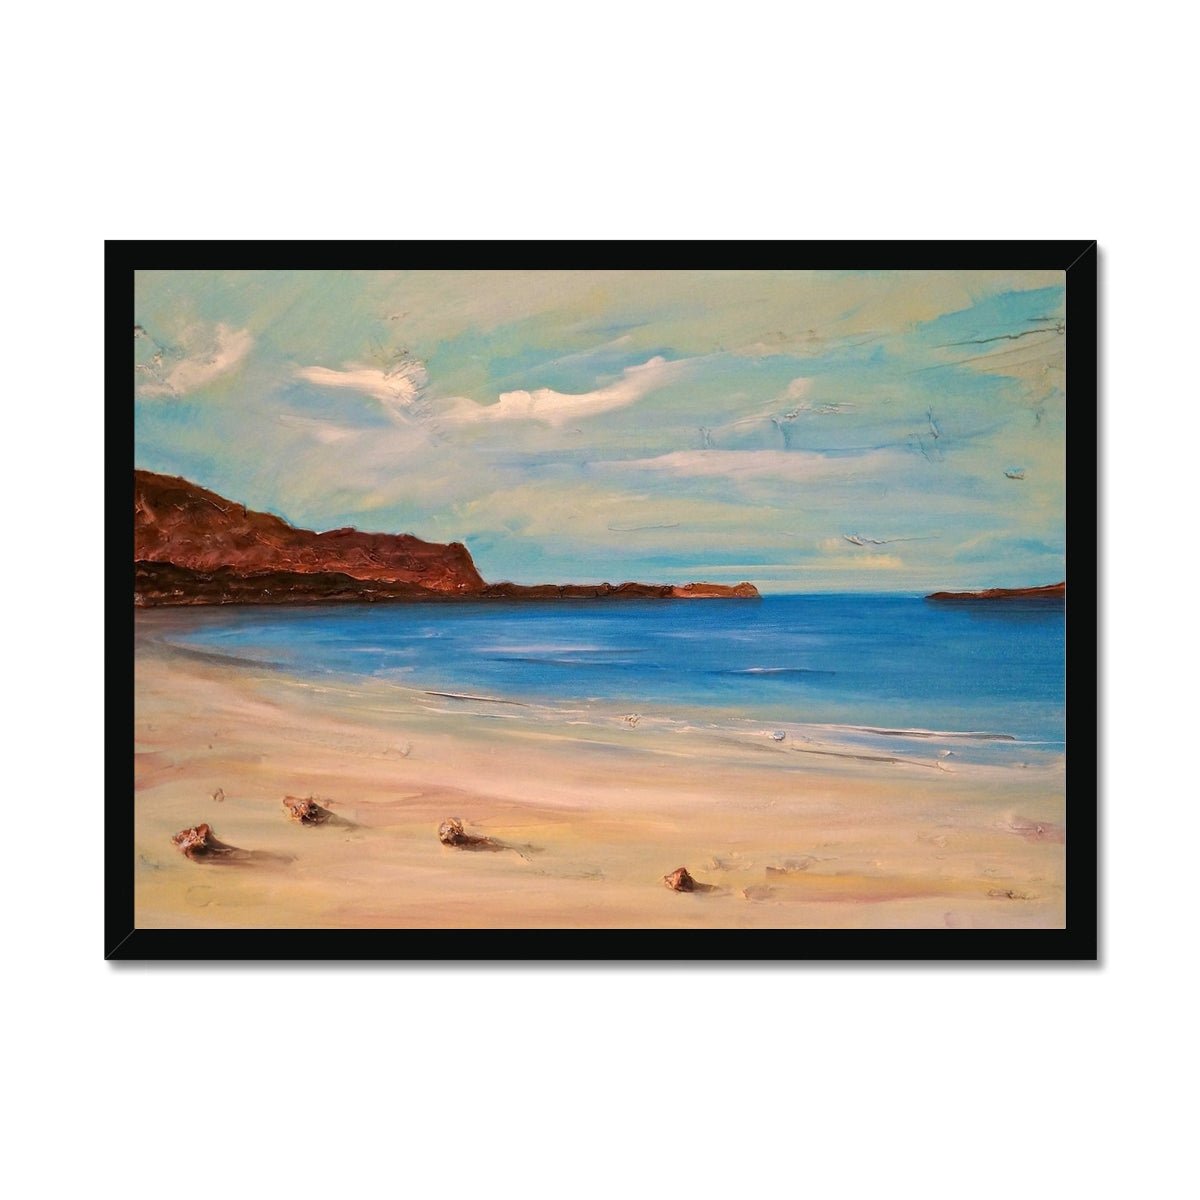 Bosta Beach Lewis Painting | Framed Prints From Scotland-Framed Prints-Hebridean Islands Art Gallery-A2 Landscape-Black Frame-Paintings, Prints, Homeware, Art Gifts From Scotland By Scottish Artist Kevin Hunter